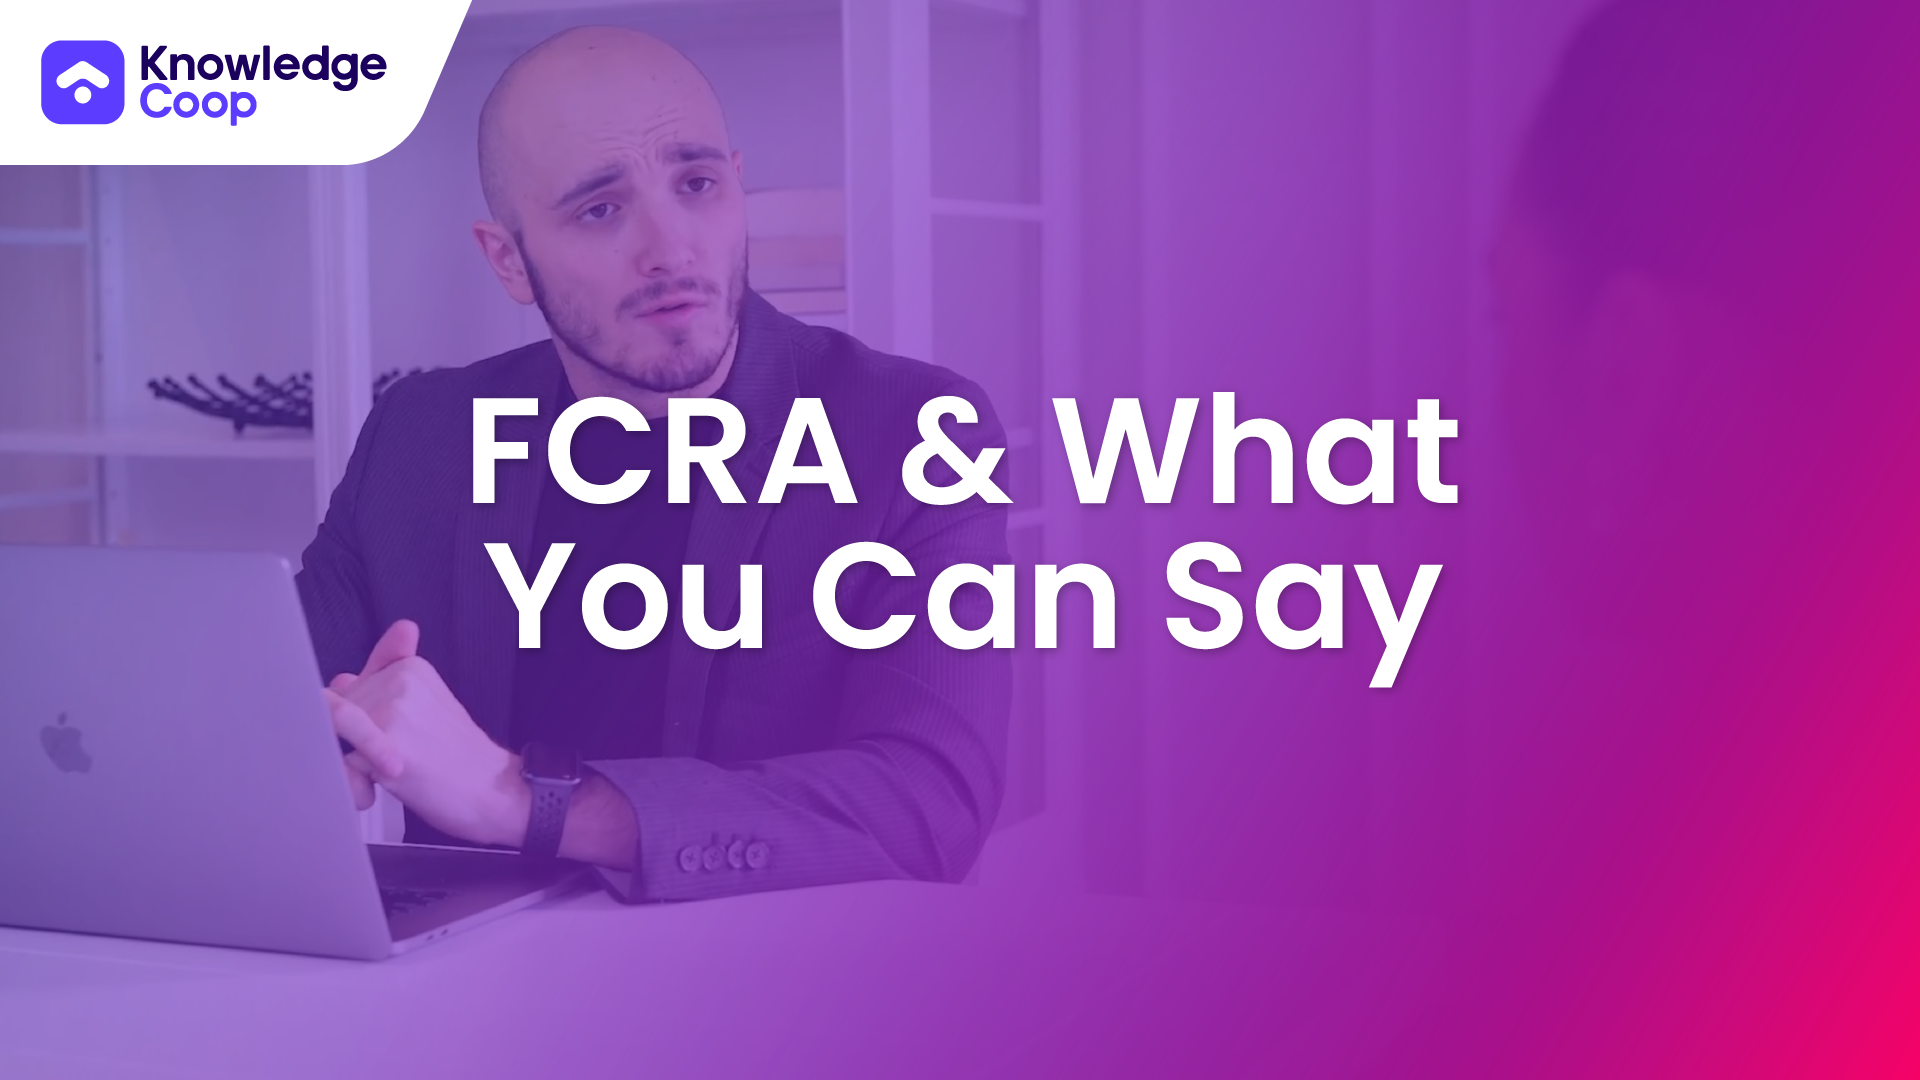 FCRA & What You Can Say